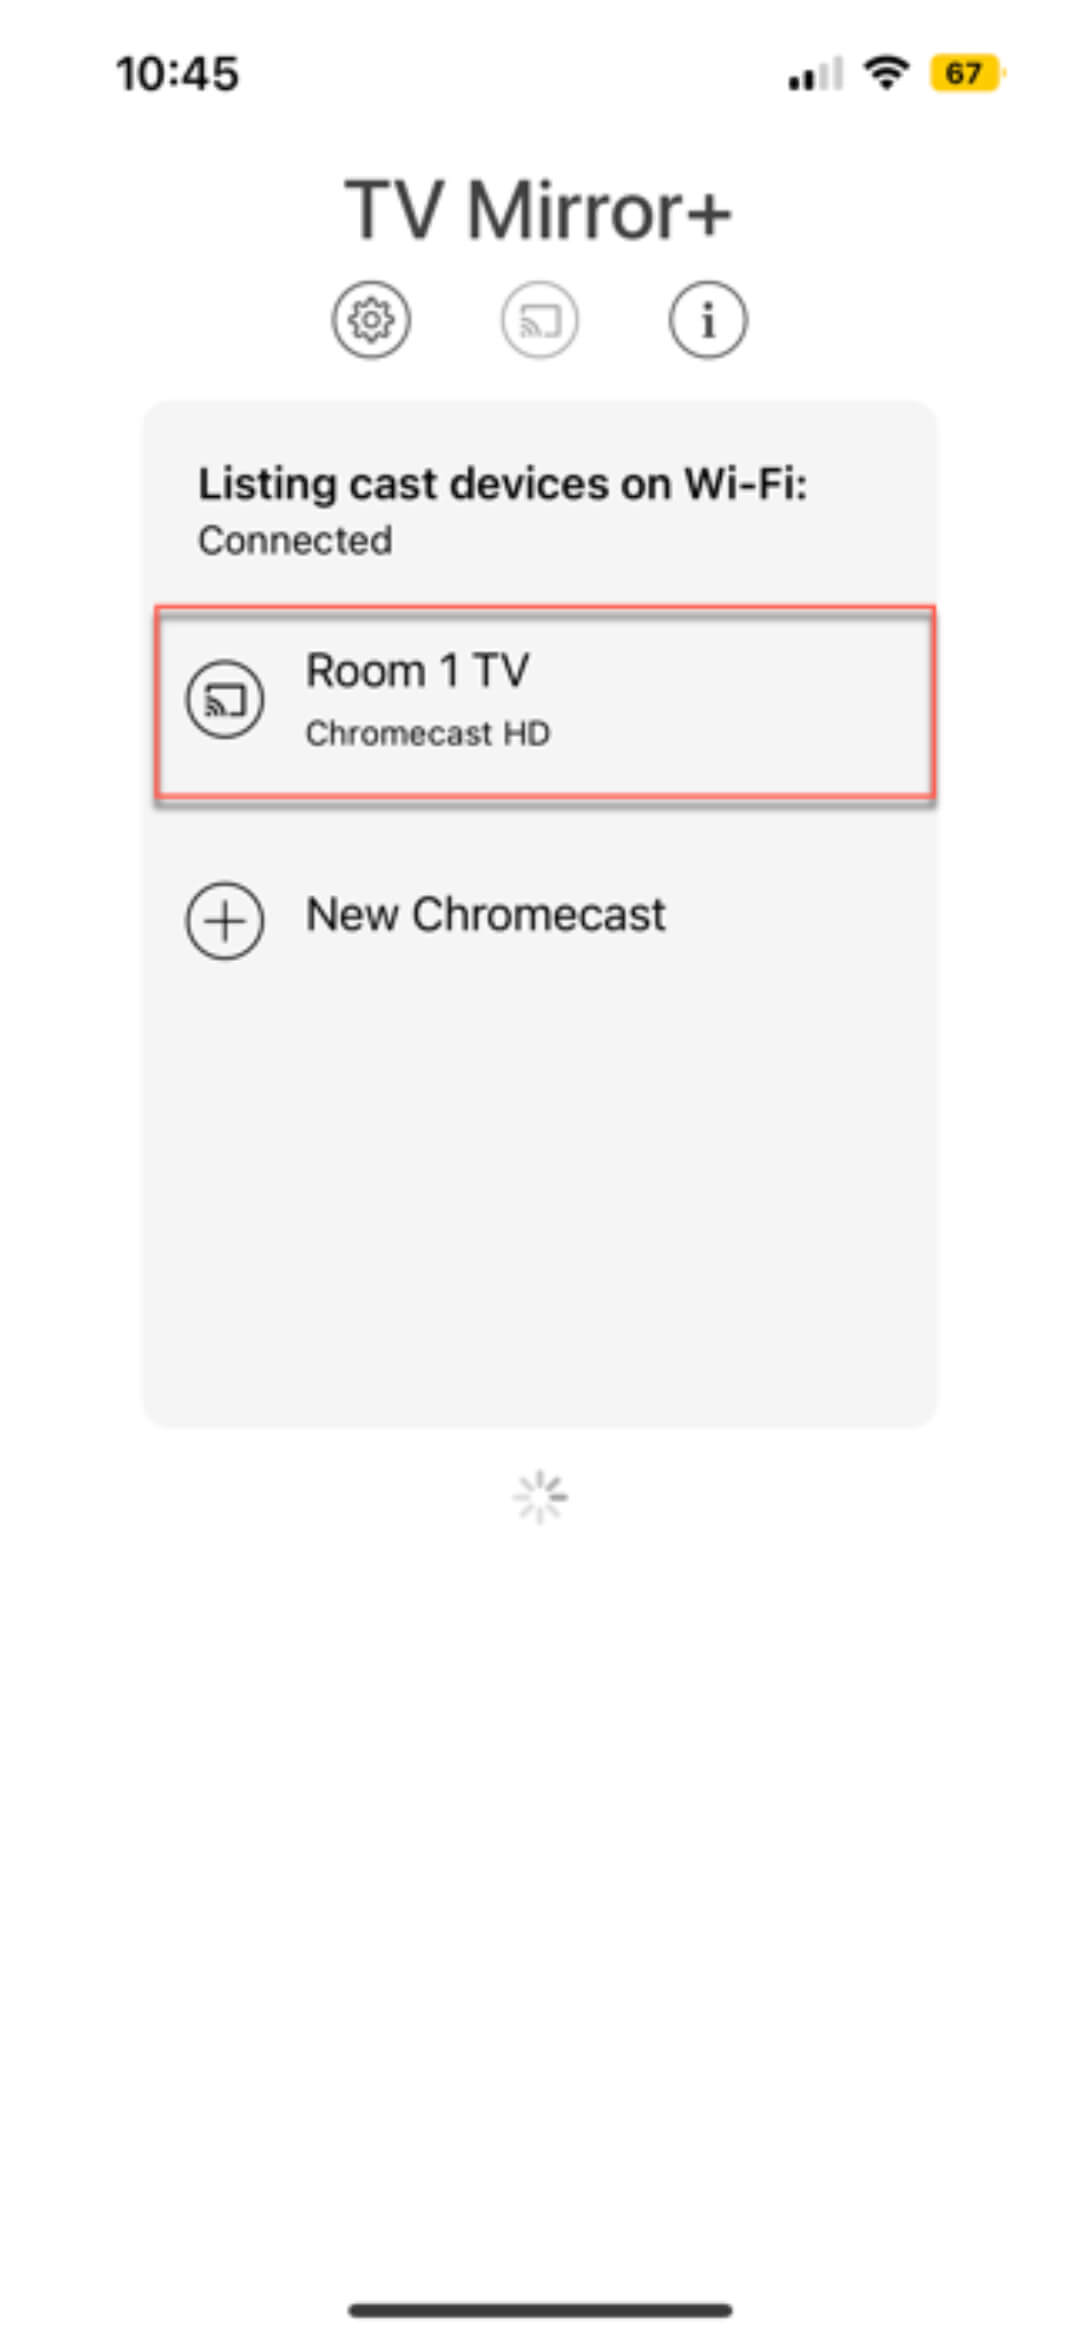 Chromecast in the list of devices